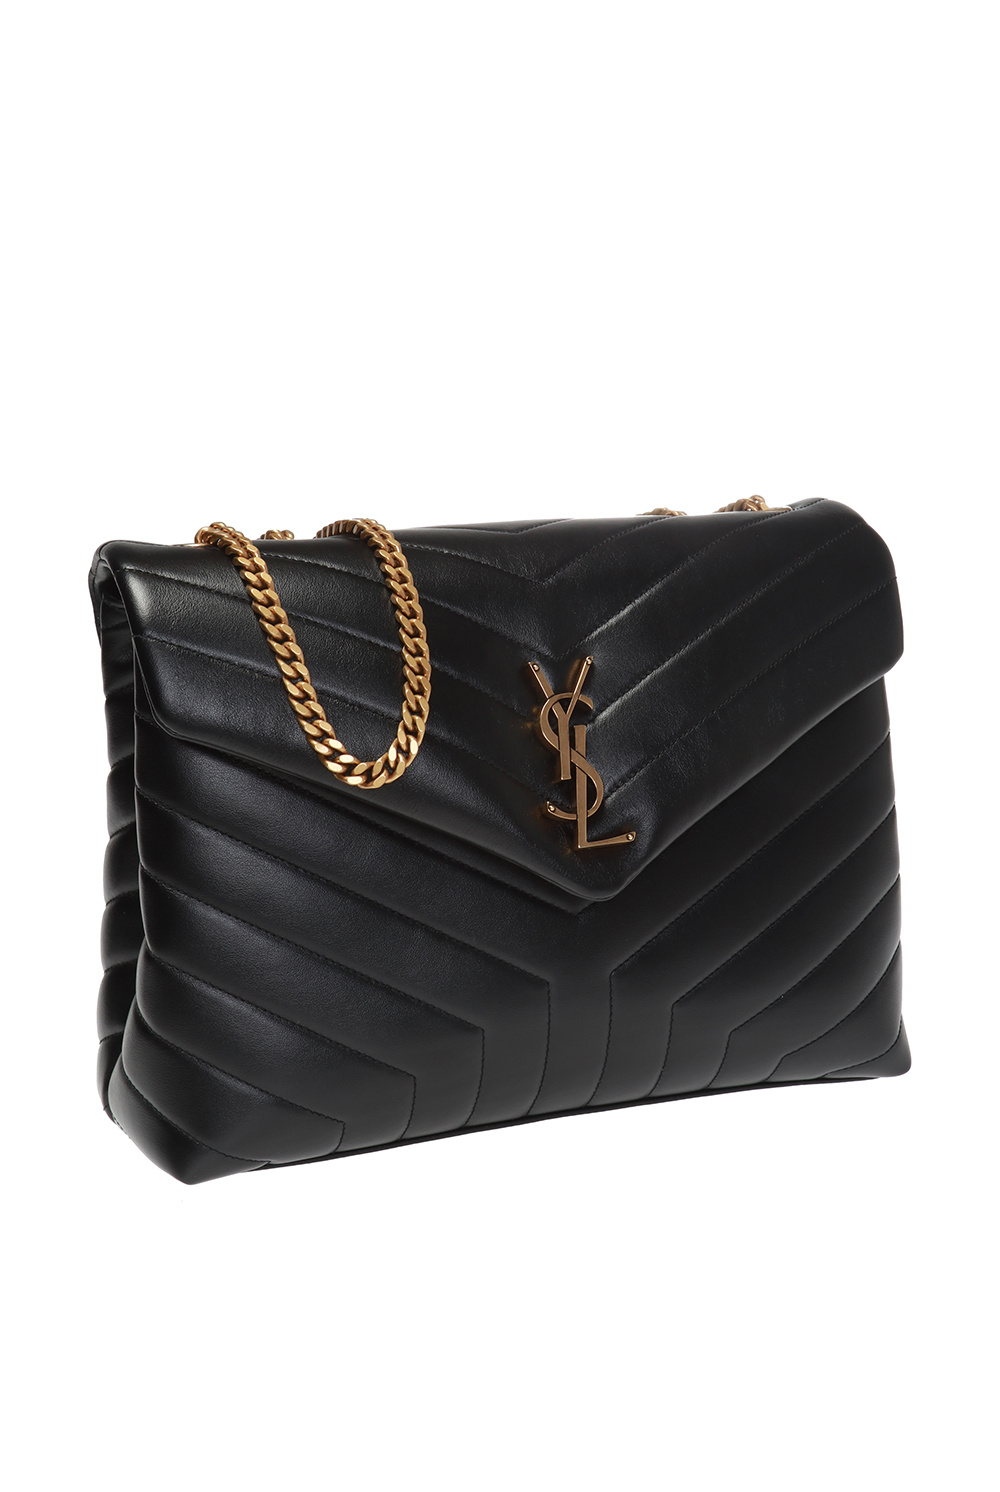 Saint Laurent ‘Loulou’ quilted geometric-frame bag